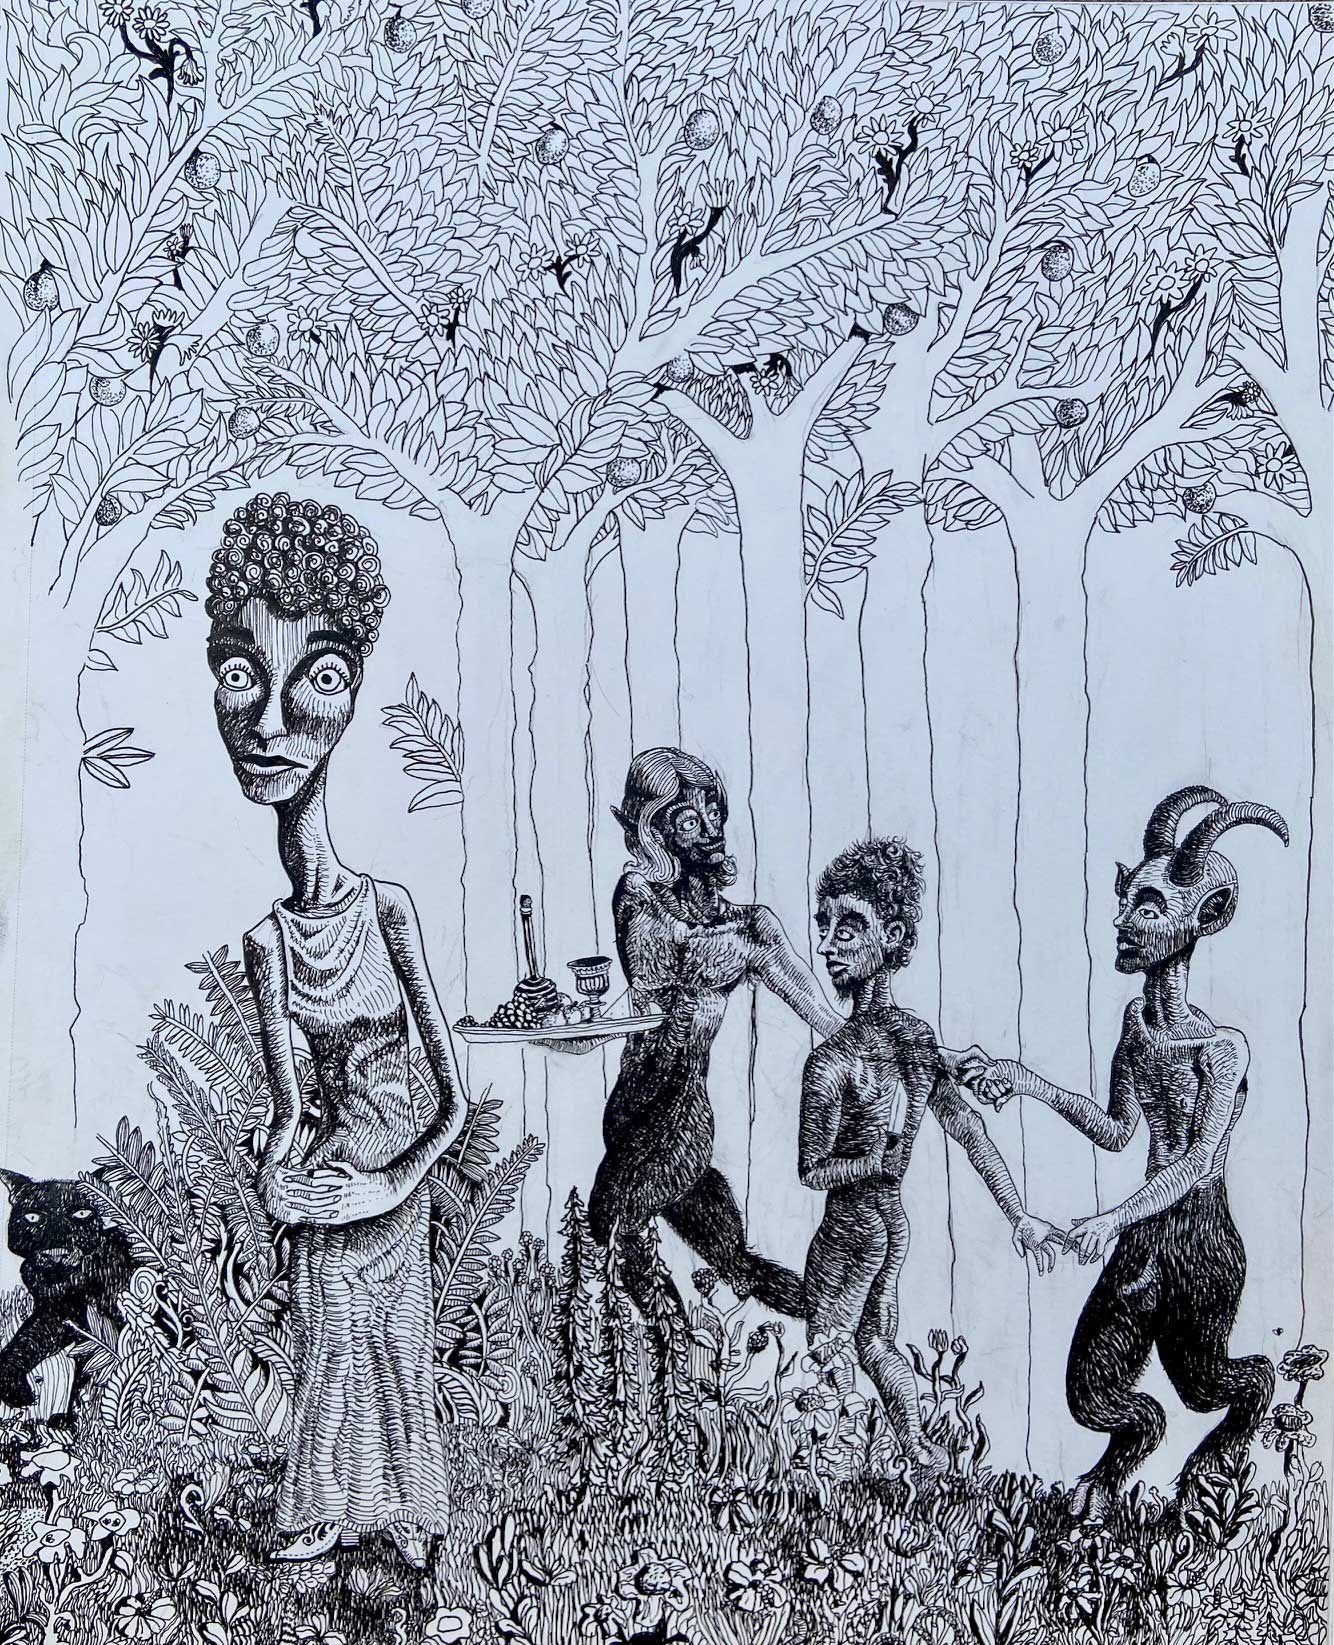 A drawing of four figures in a garden